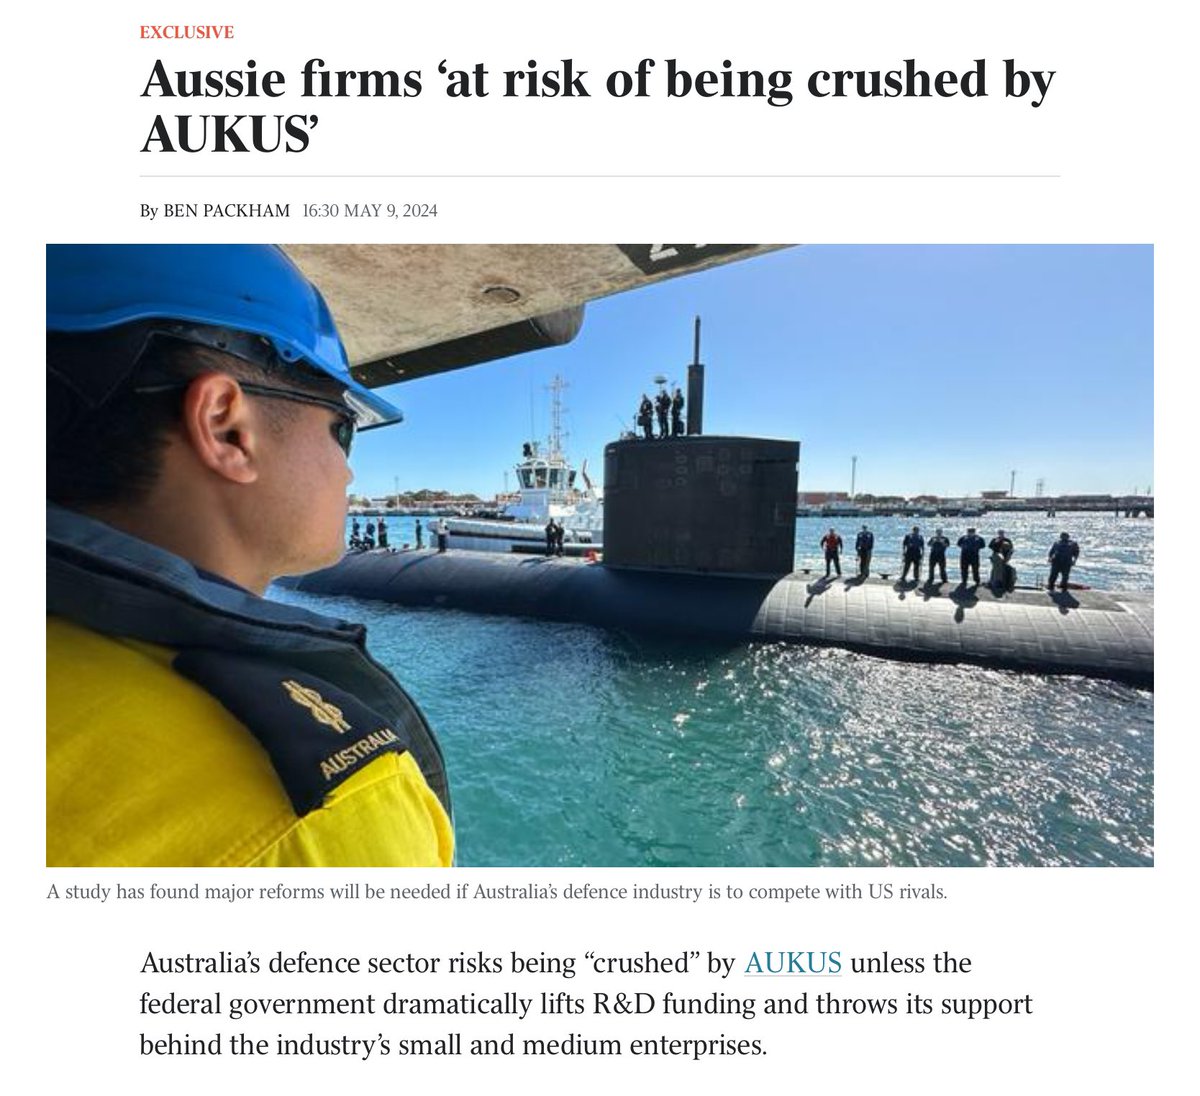 There’s just nothing - repeat, nothing - good about #AUKUS. As we try to find ships large enough to carry the $10B in shipyard subsidies we’re exporting to the US and UK, the Govt is torpedoing our own local Defence industry. Well done @AlboMP and @RichardMarlesMP 🤦‍♂️! @auspol